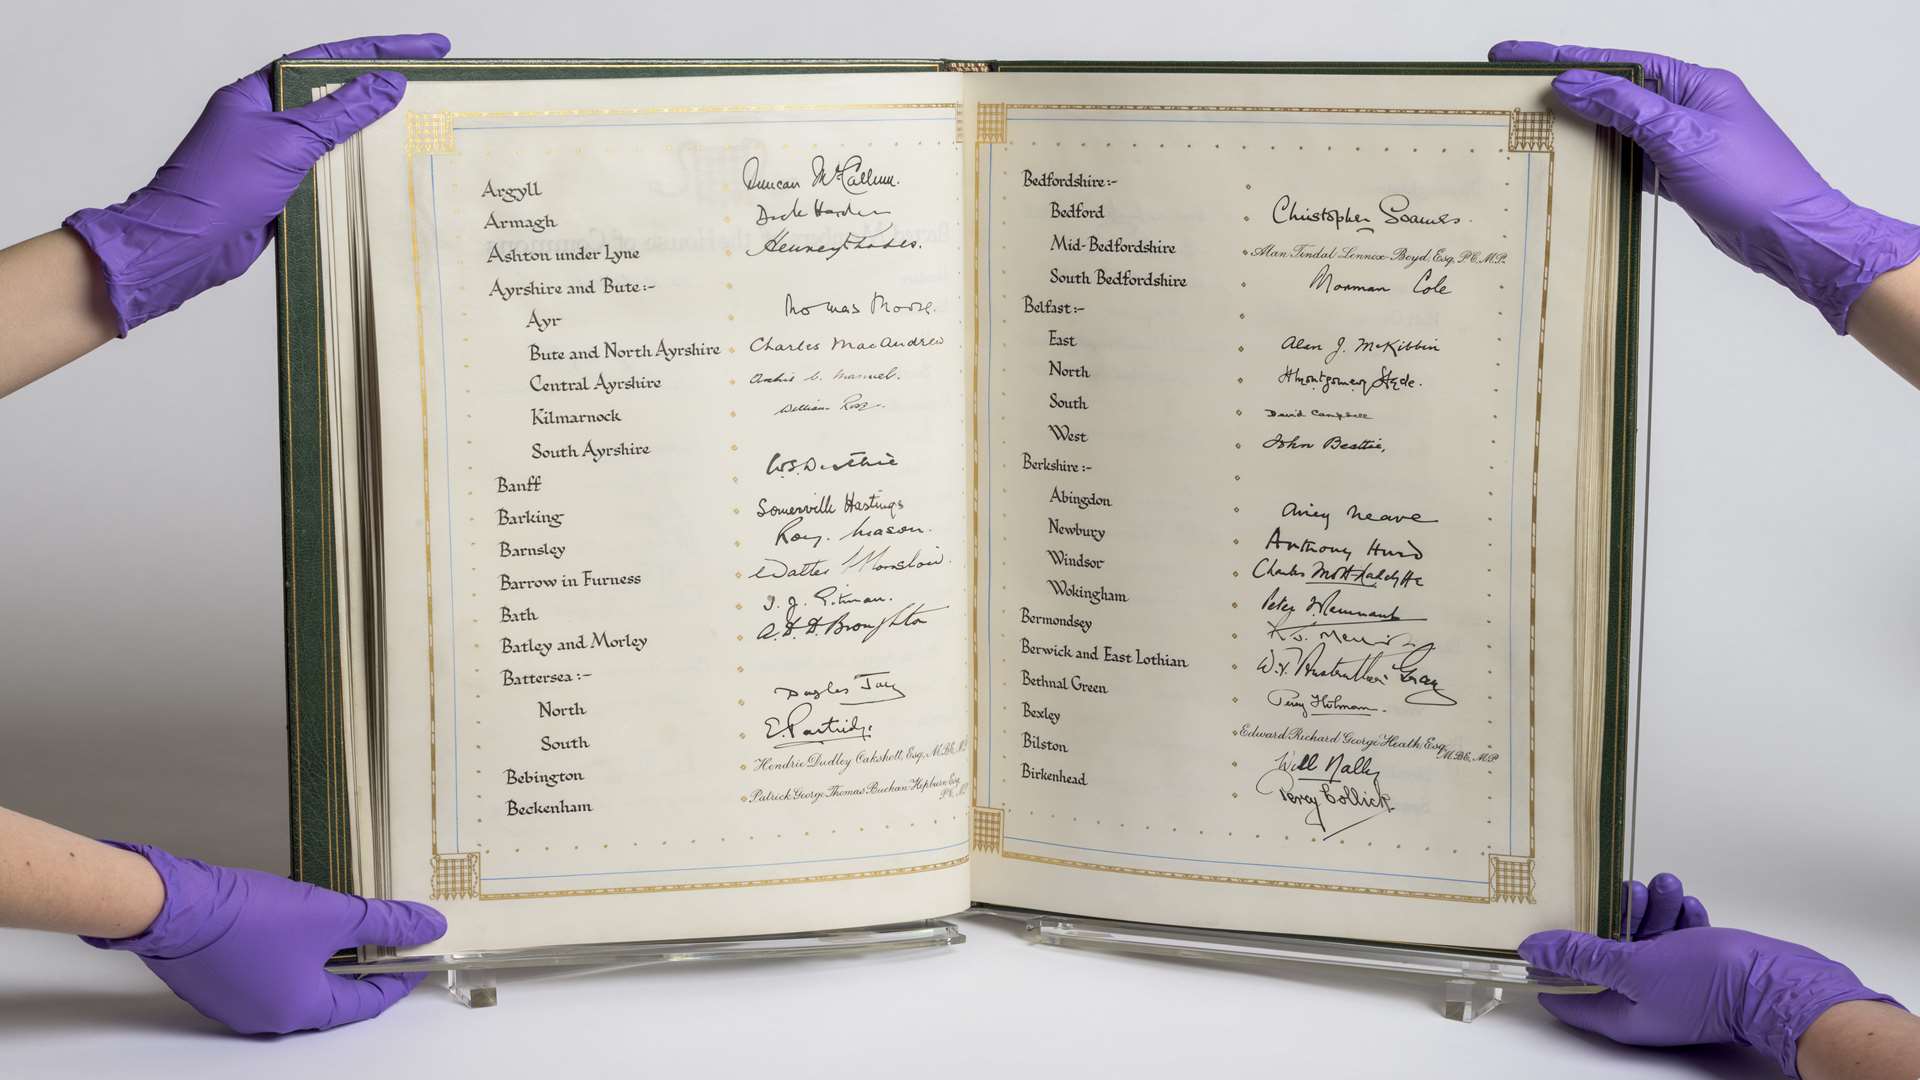 Churchill's House of Commons 80th birthday book